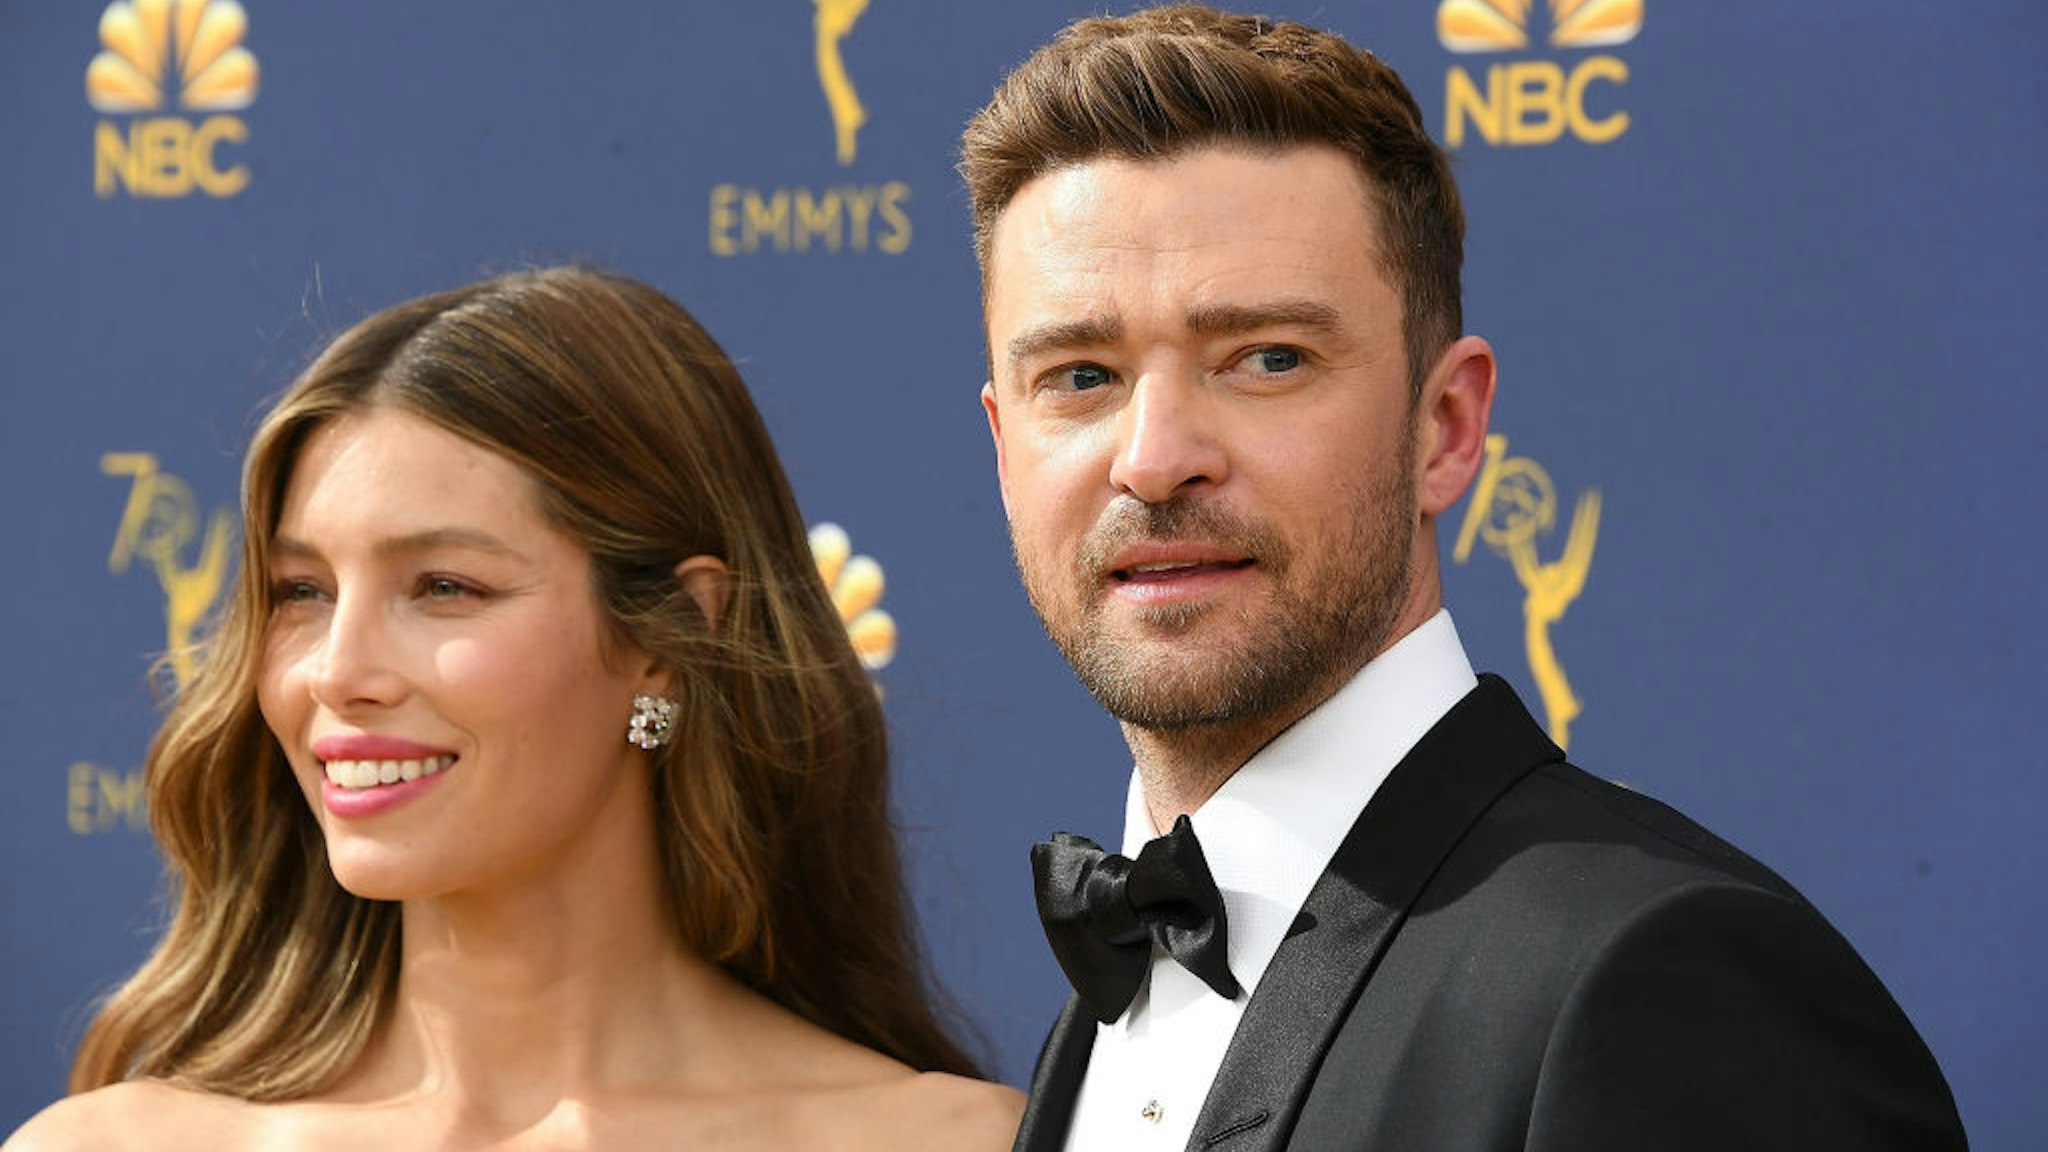 Jessica Biel, Justin Timberlake arrives at the 70th Emmy Awards on September 17, 2018 in Los Angeles, California